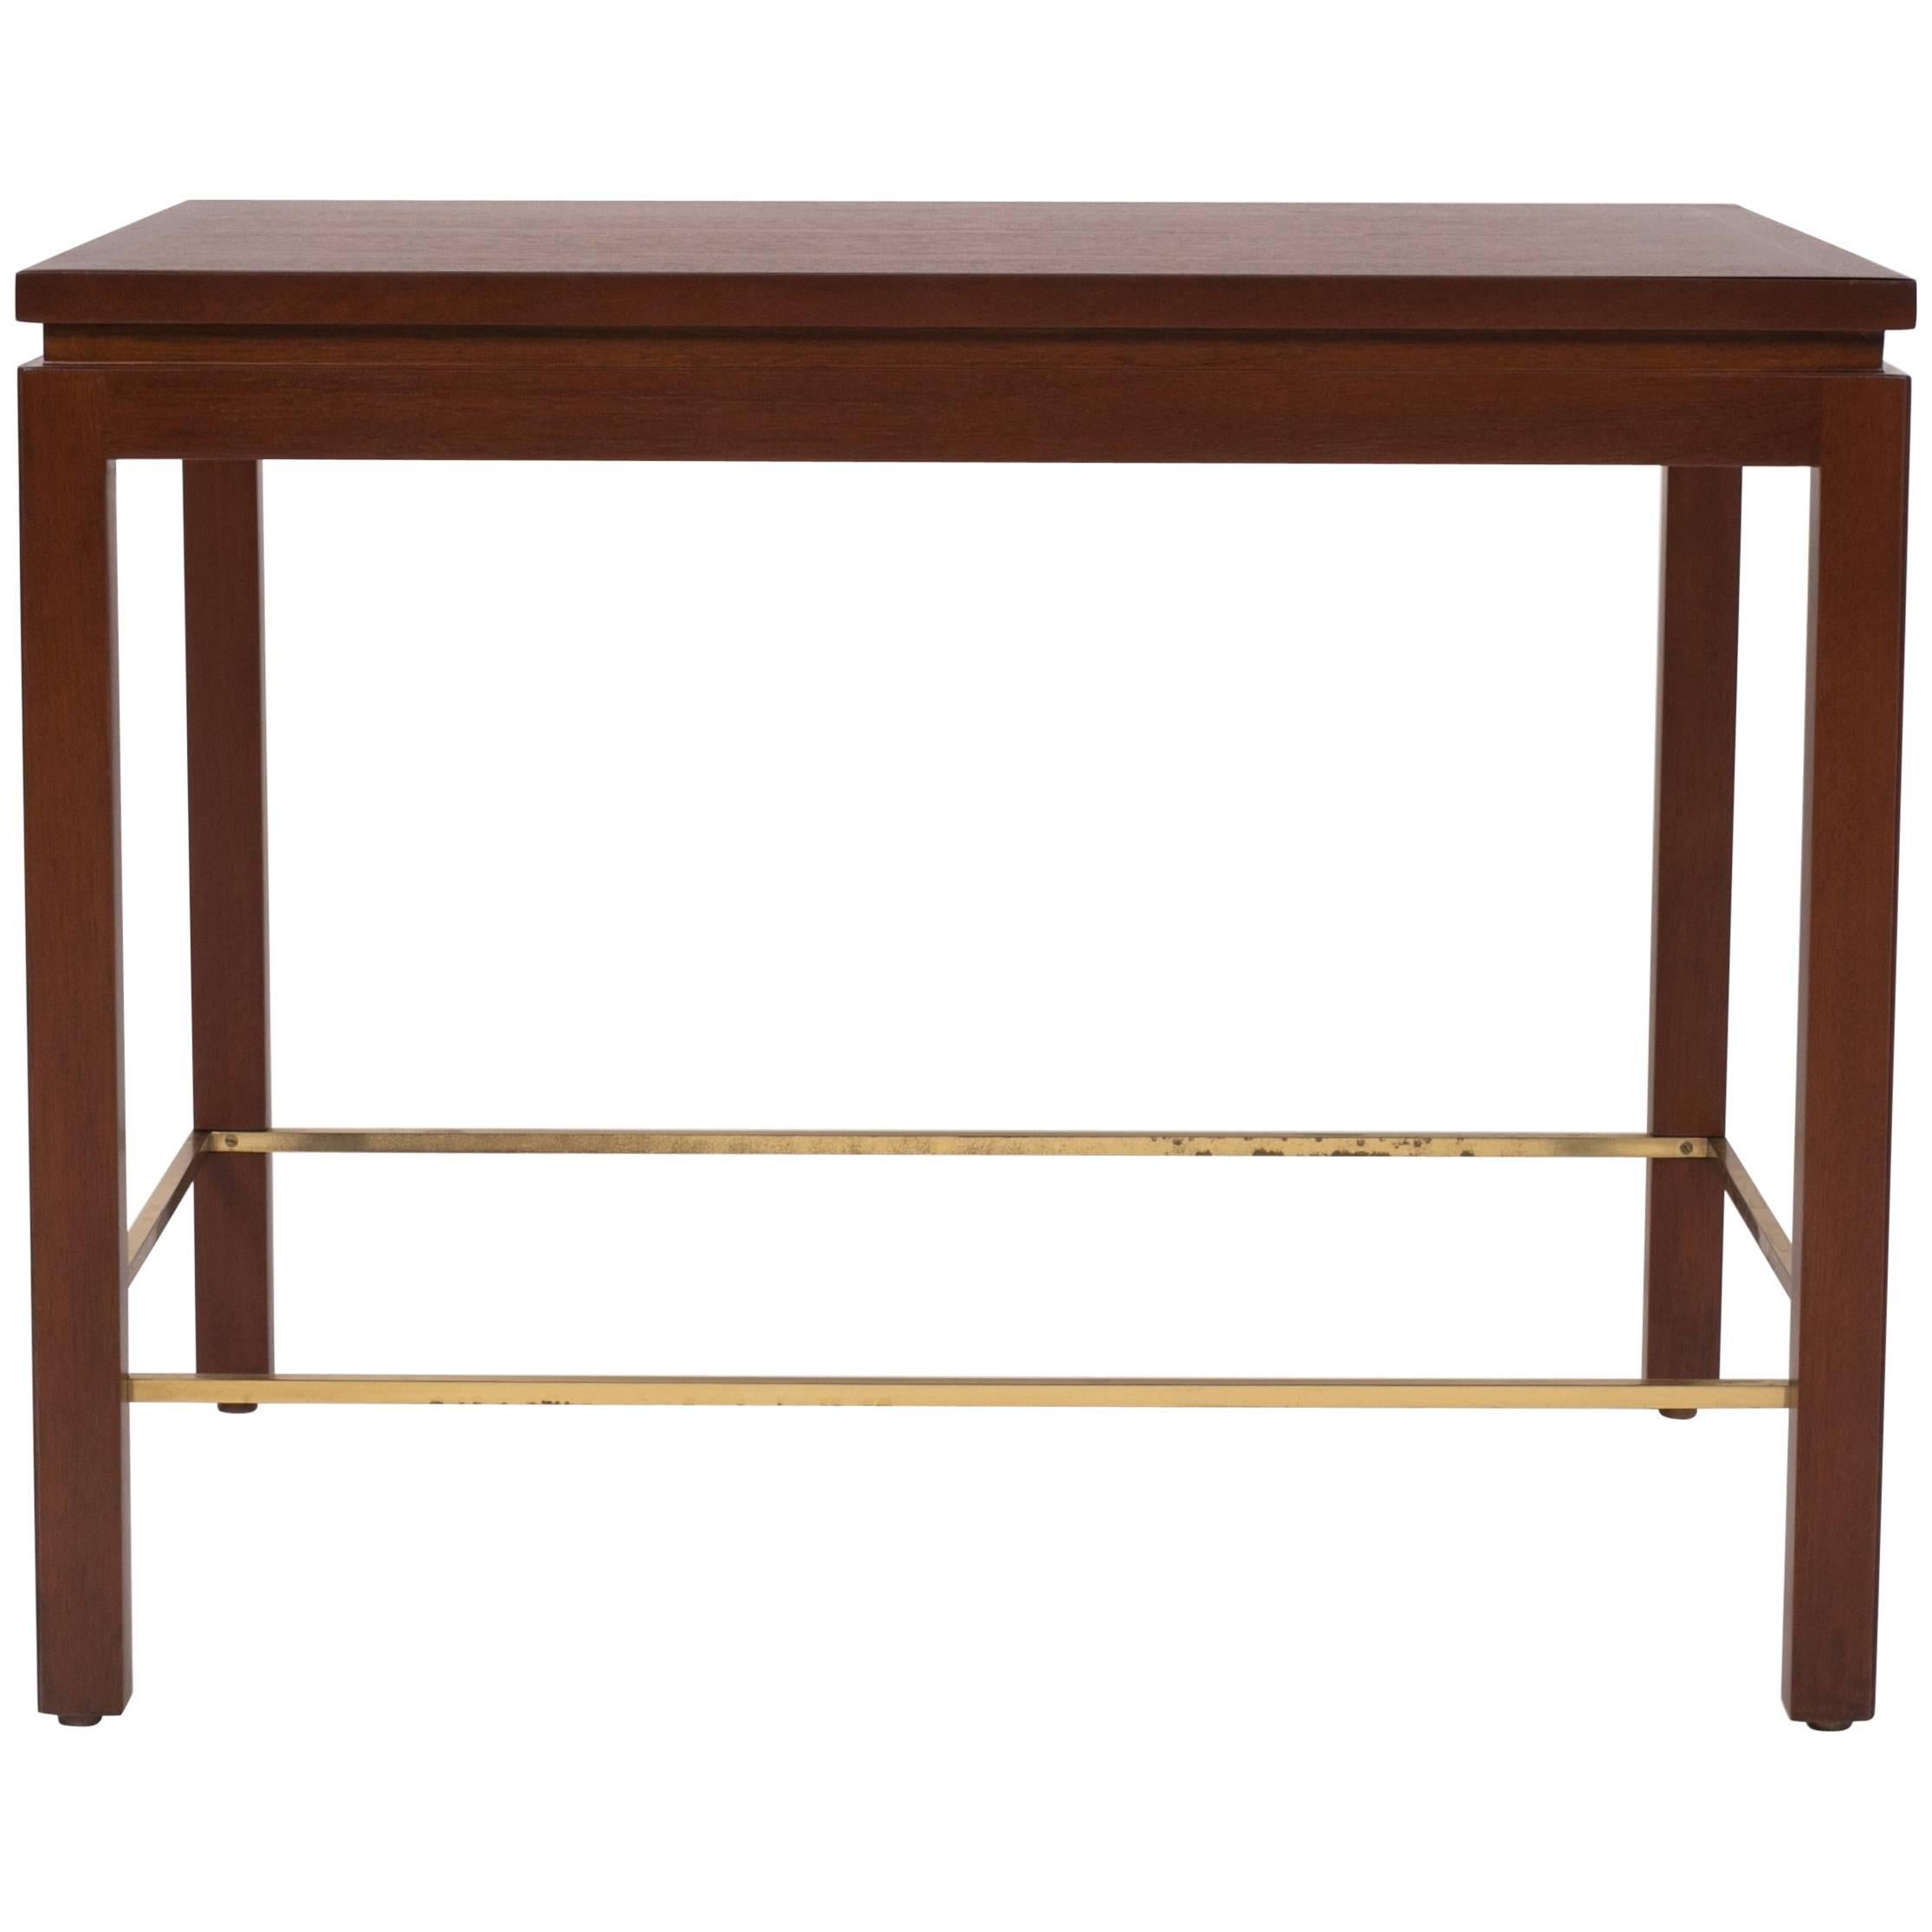 A nearly square side table designed by Edward Wormley for Dunbar. The model 310 has four square post legs that sit flush with the corners of the piece. Each leg is notched to fit a brass stretcher that defines the interior edges of the table. The